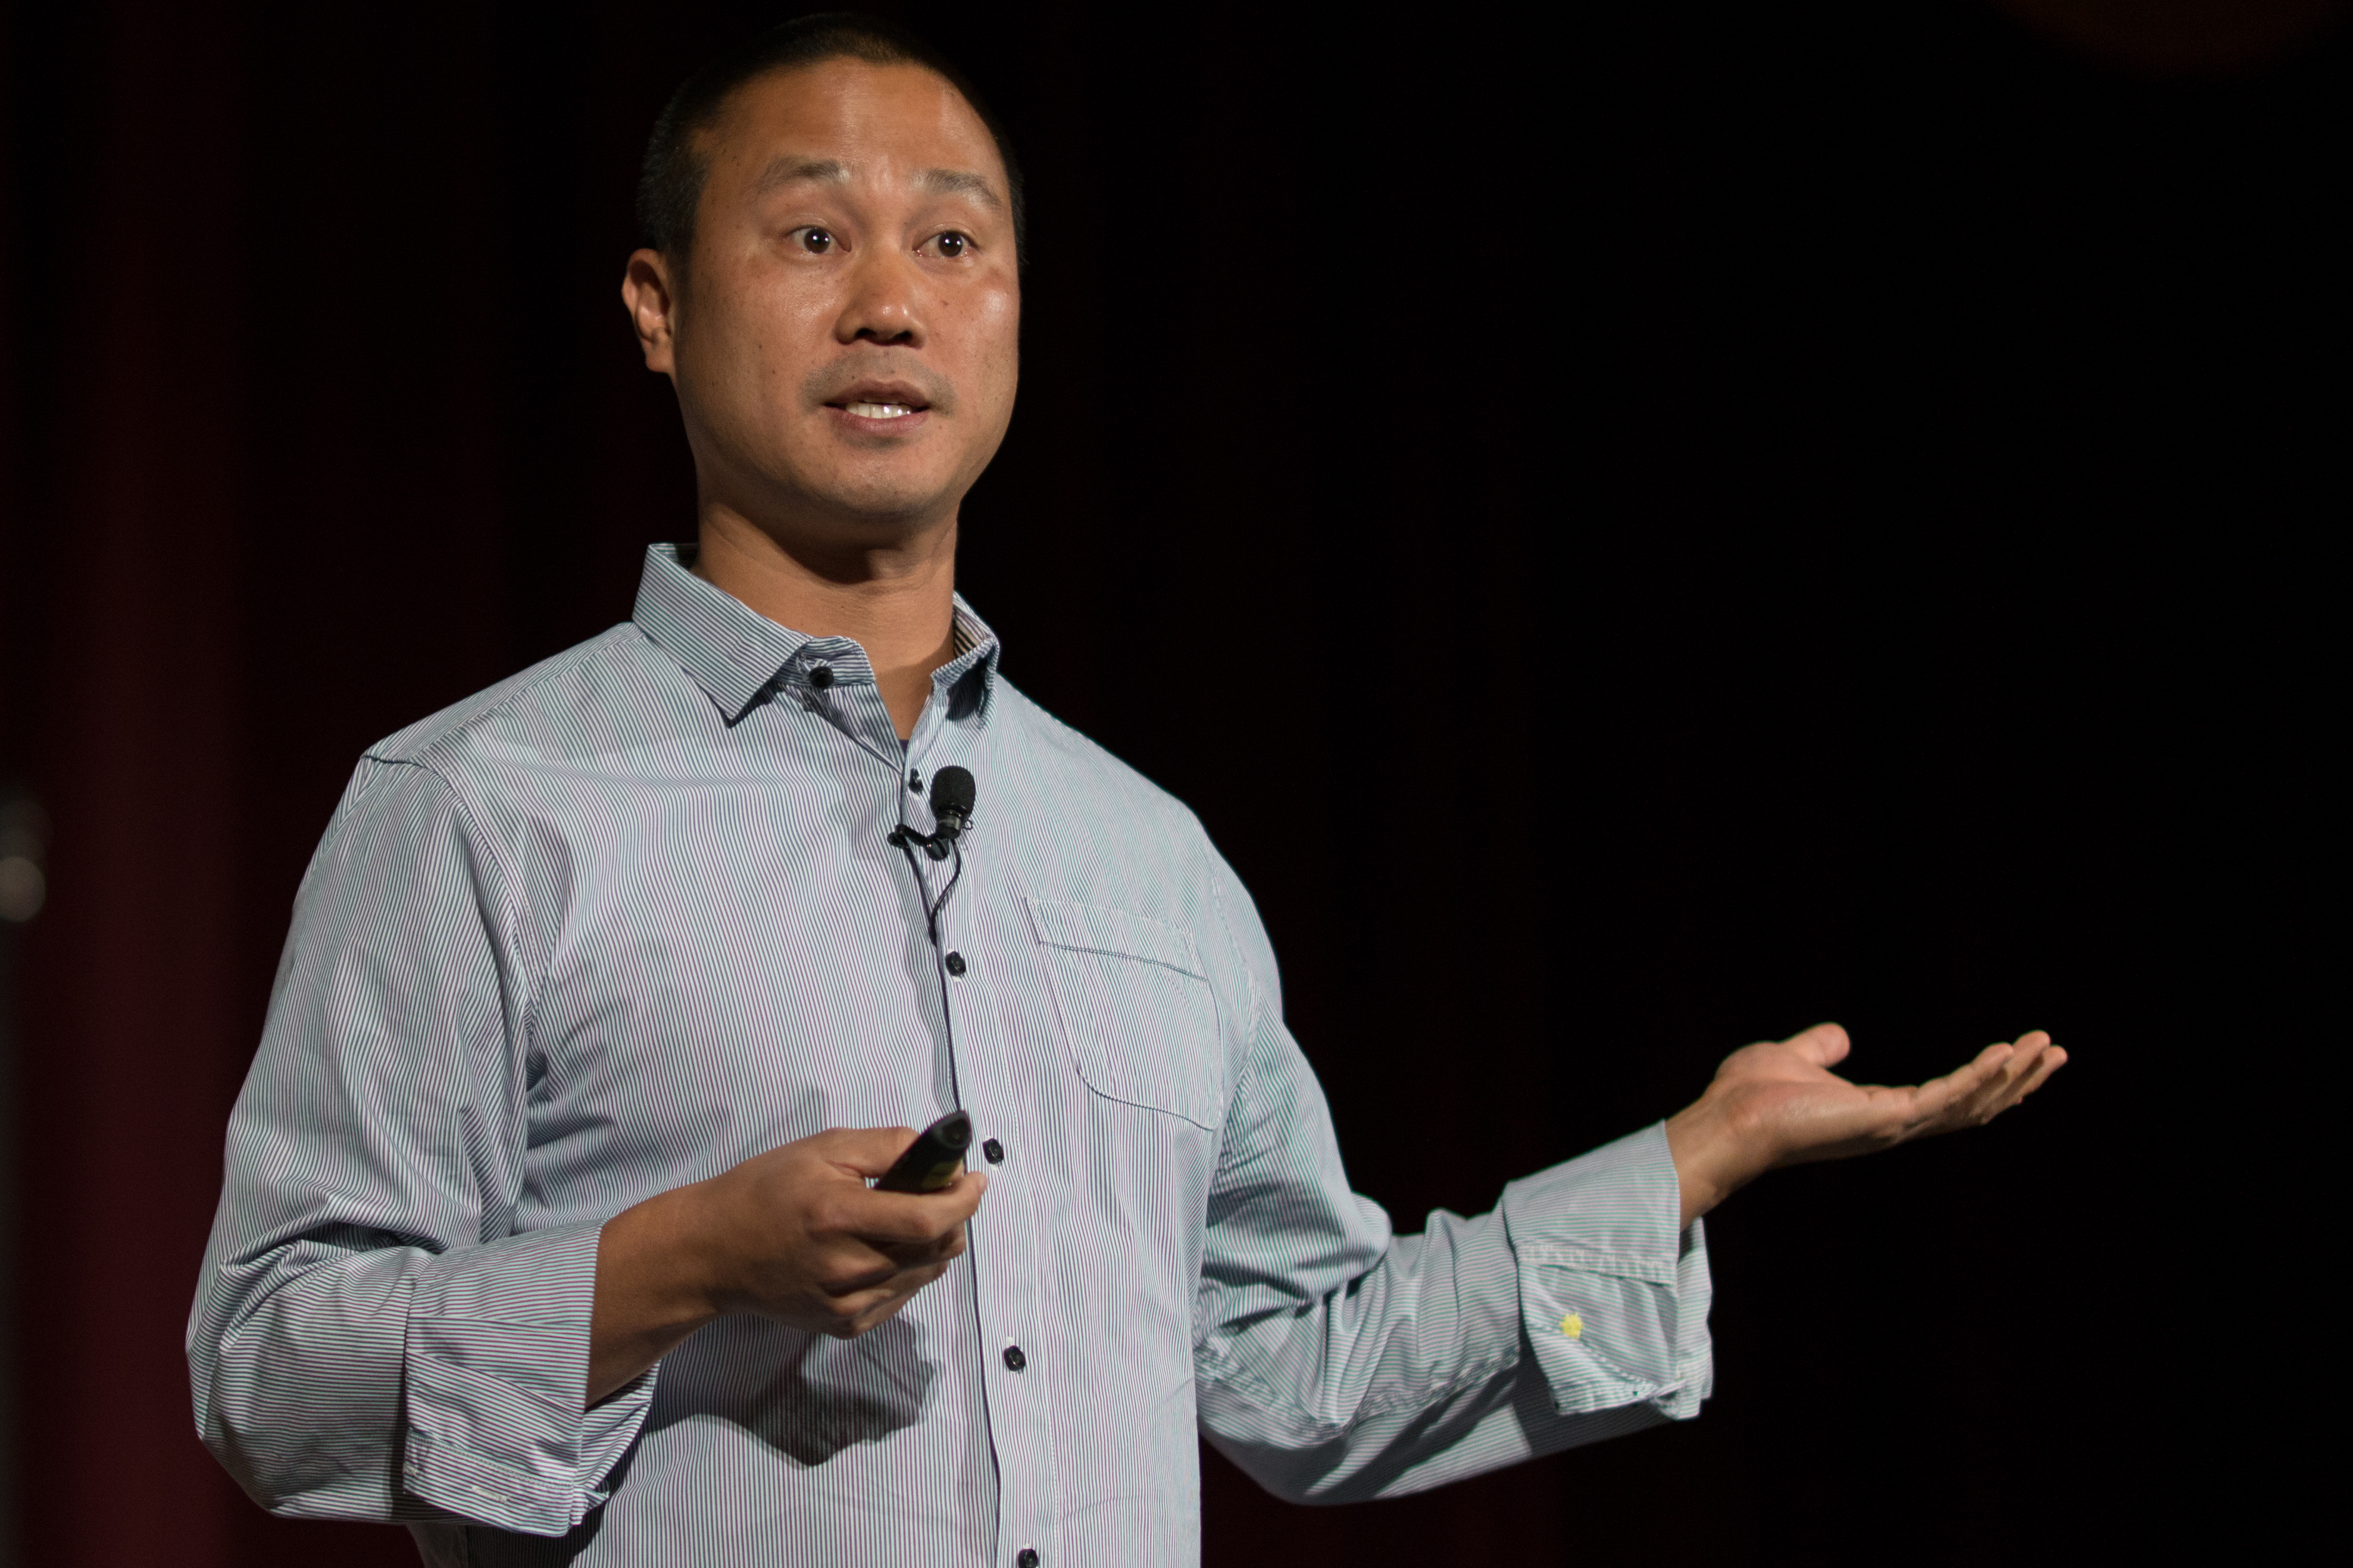 Has Tony Hsieh gone too far by zapping management?